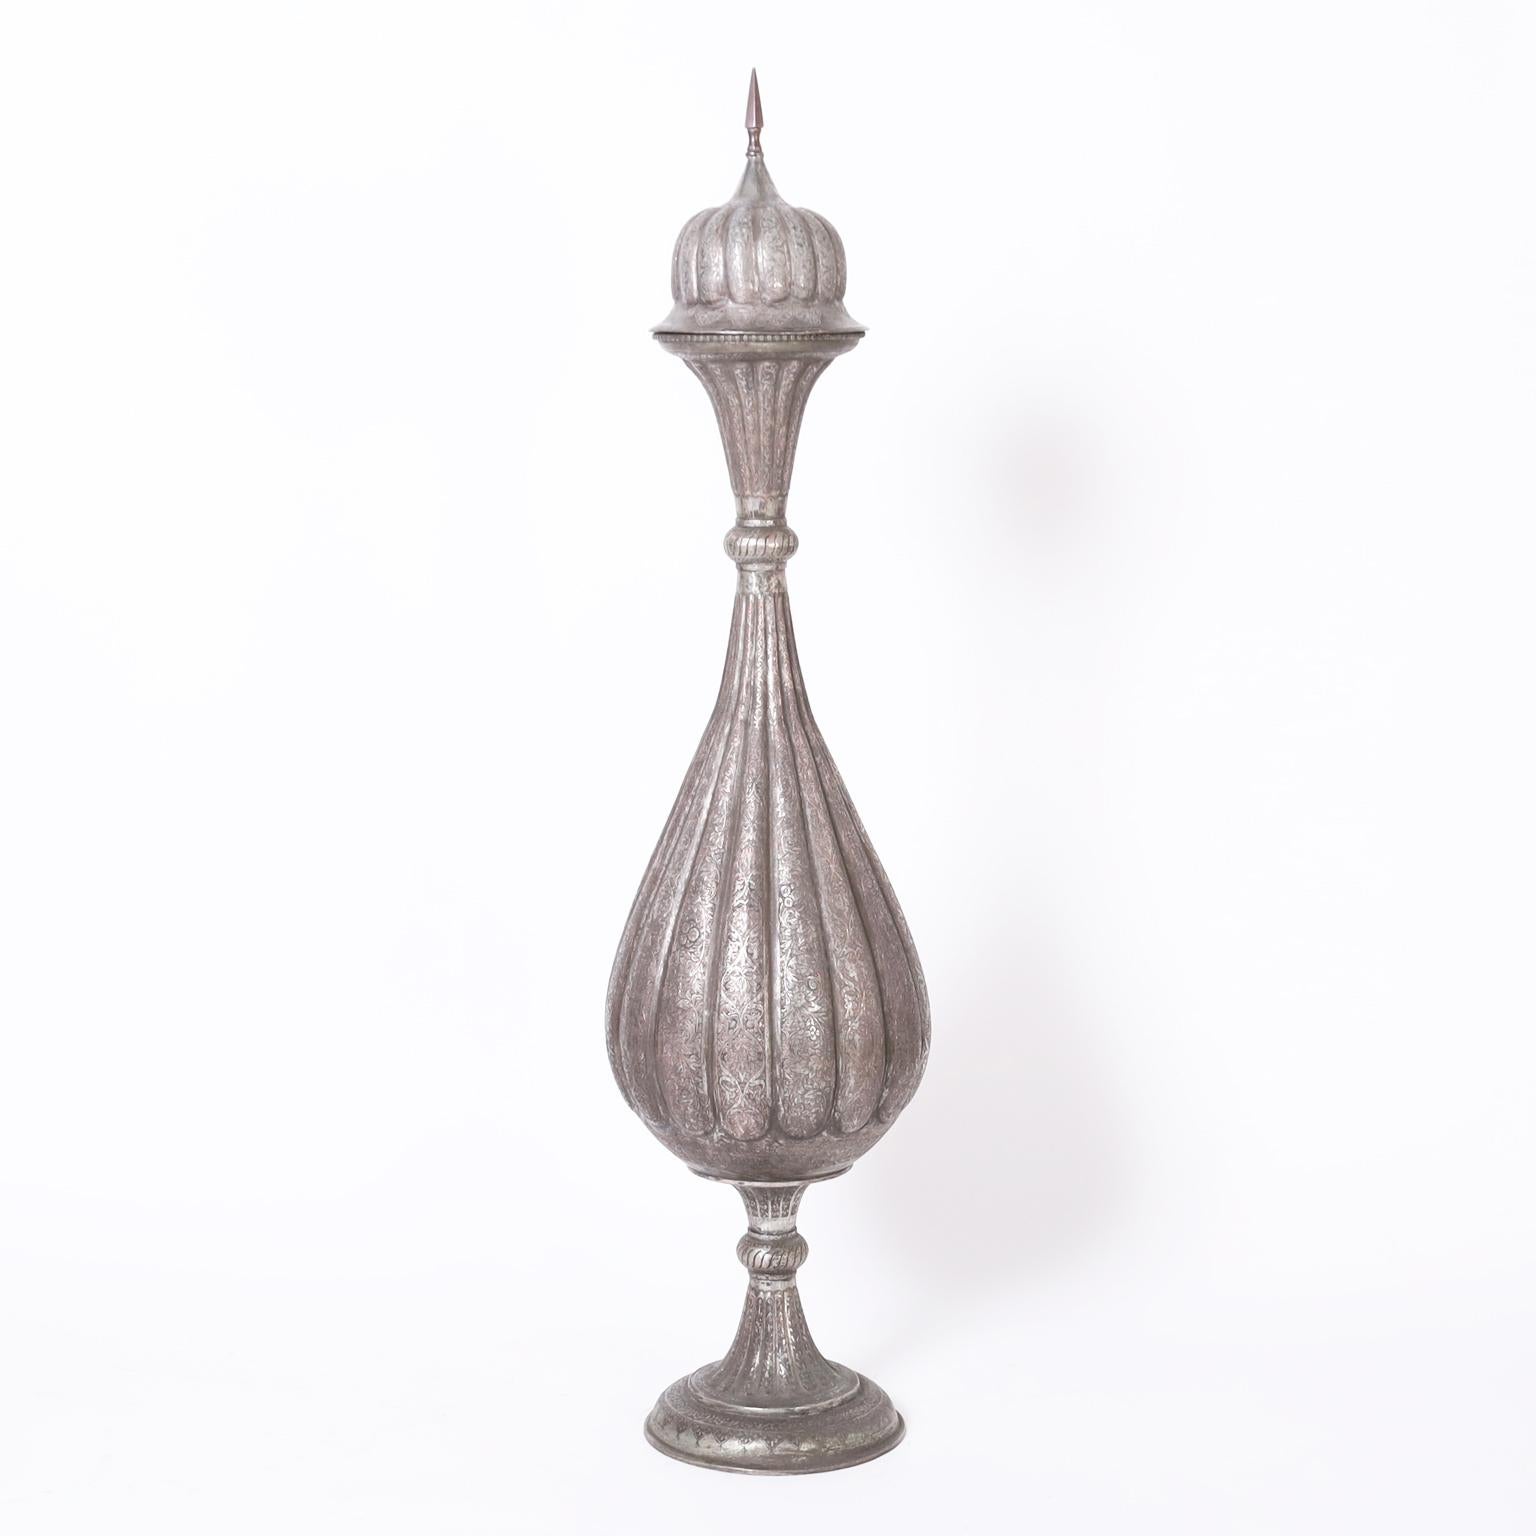 Stand out pair of antique Anglo Indian lidded urns handcrafted in silver on copper in a dramatic exotic form featuring ambitious hand engraved floral designs throughout. Best of the genre.